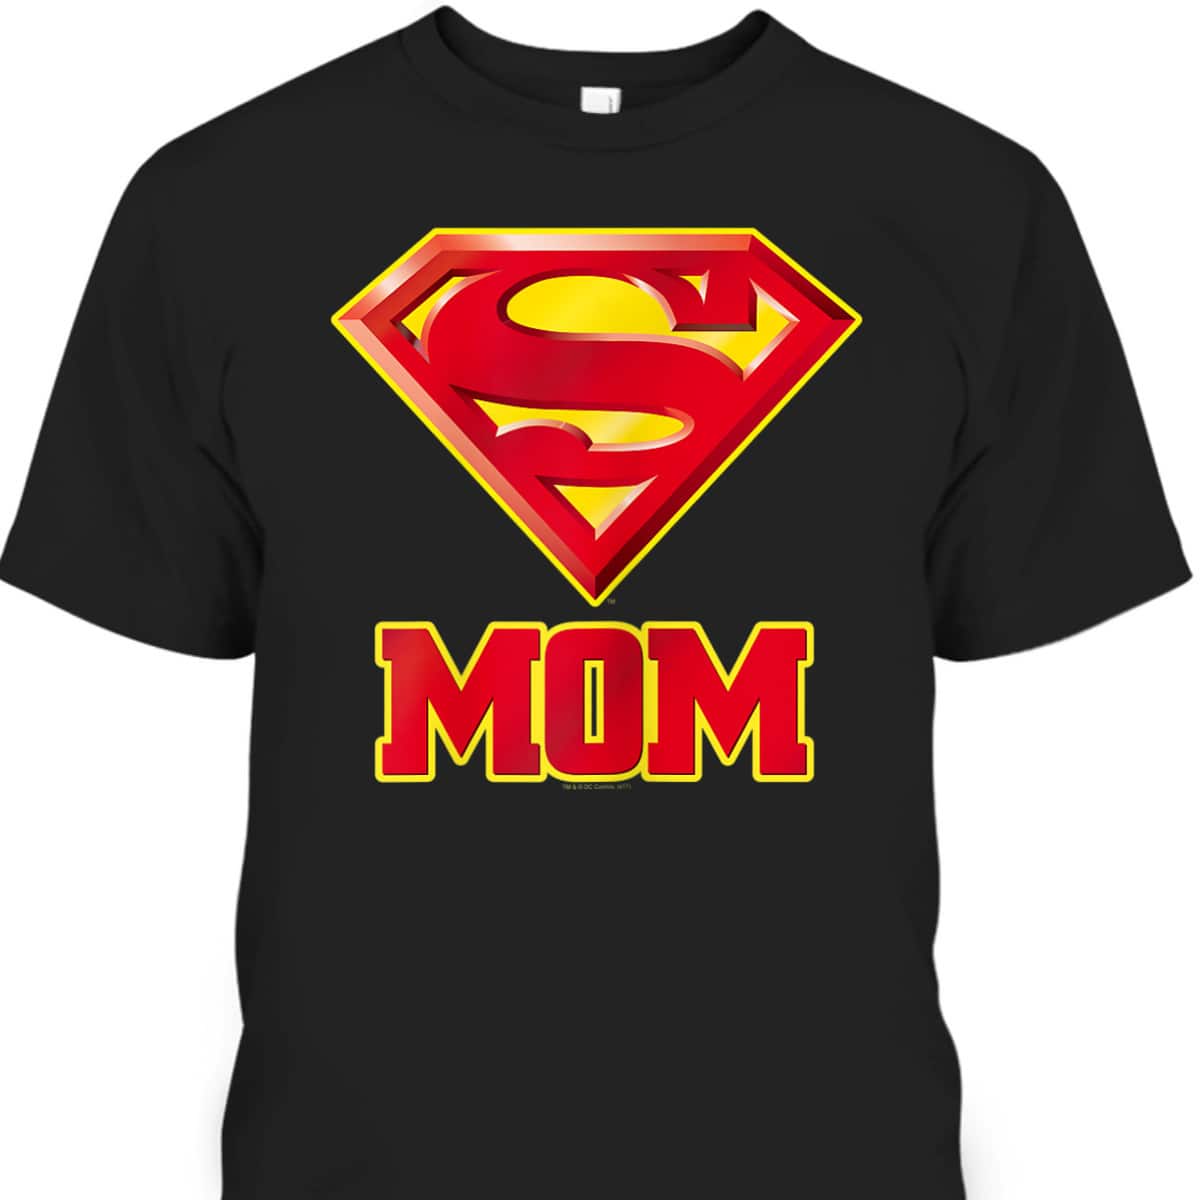 Superman Mother's Day T-Shirt Super Mom Gift